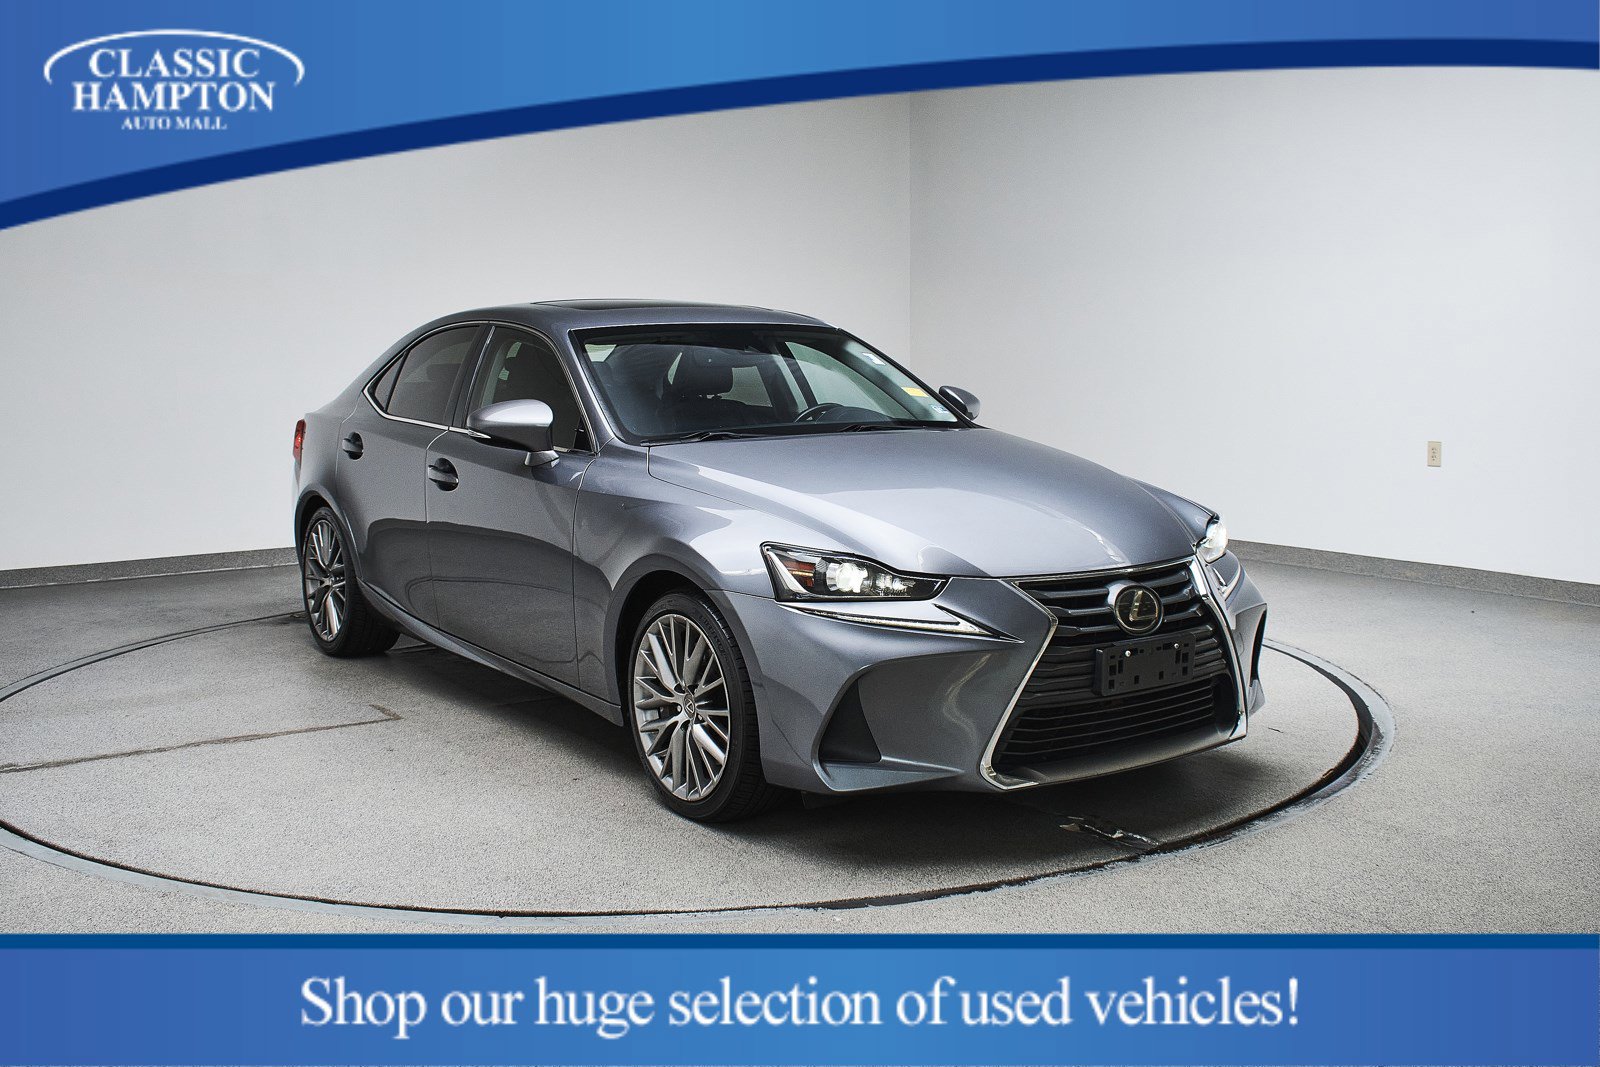 Pre-Owned 2017 Lexus IS 200t 4dr Car in Smithfield #MB53204B | Classic Ford  of Smithfield